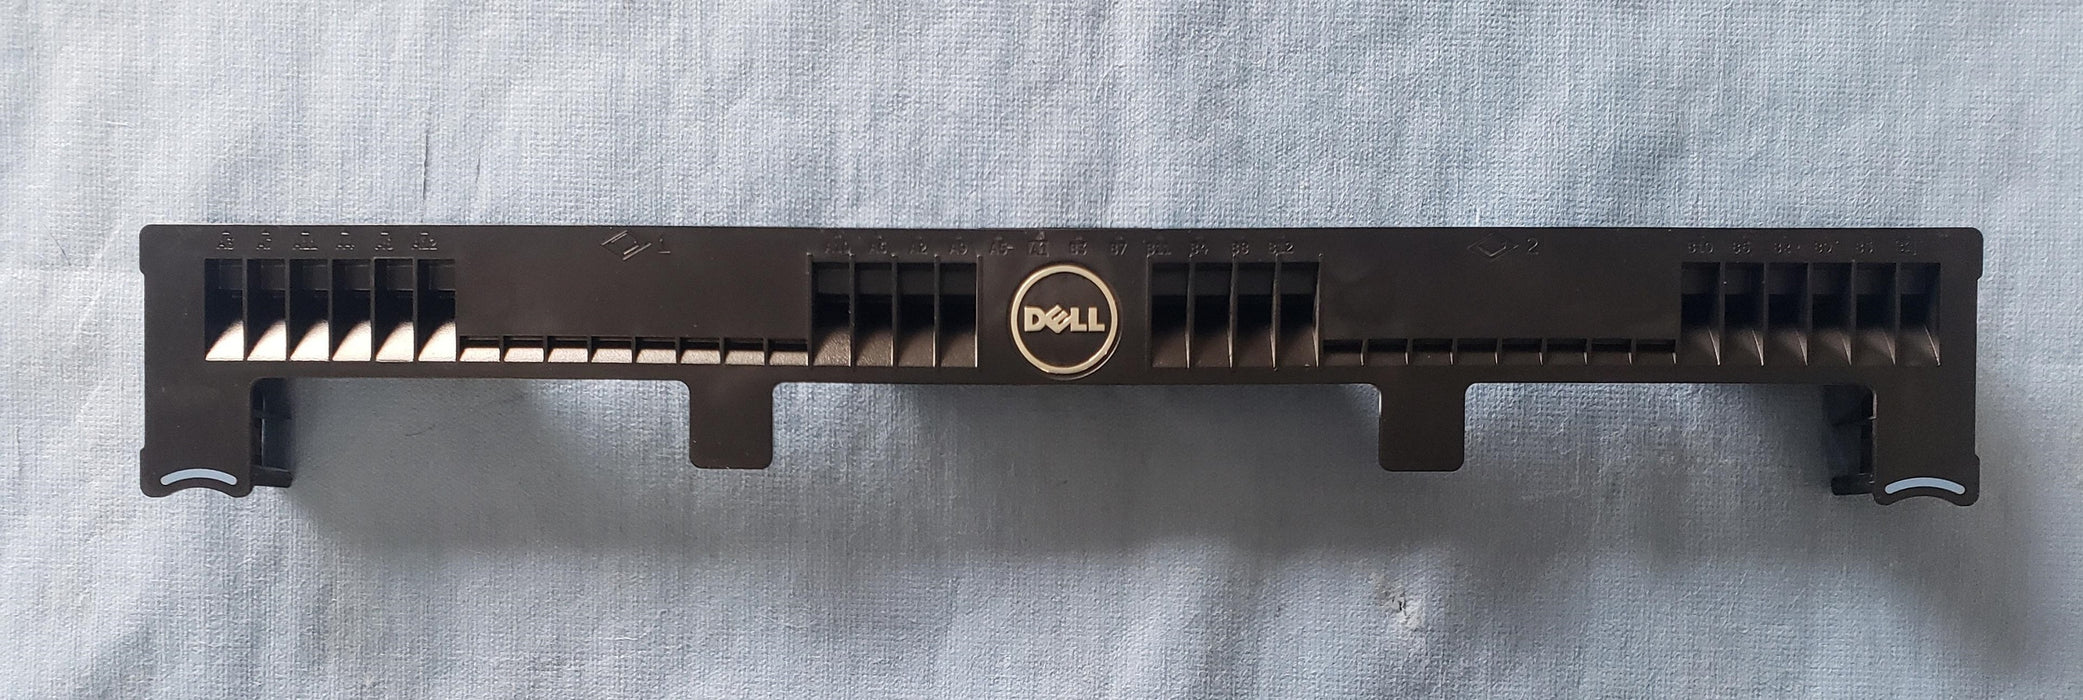 Dell JVX59 Memory CPU Cooling Baffle Shroud for PowerEdge R630